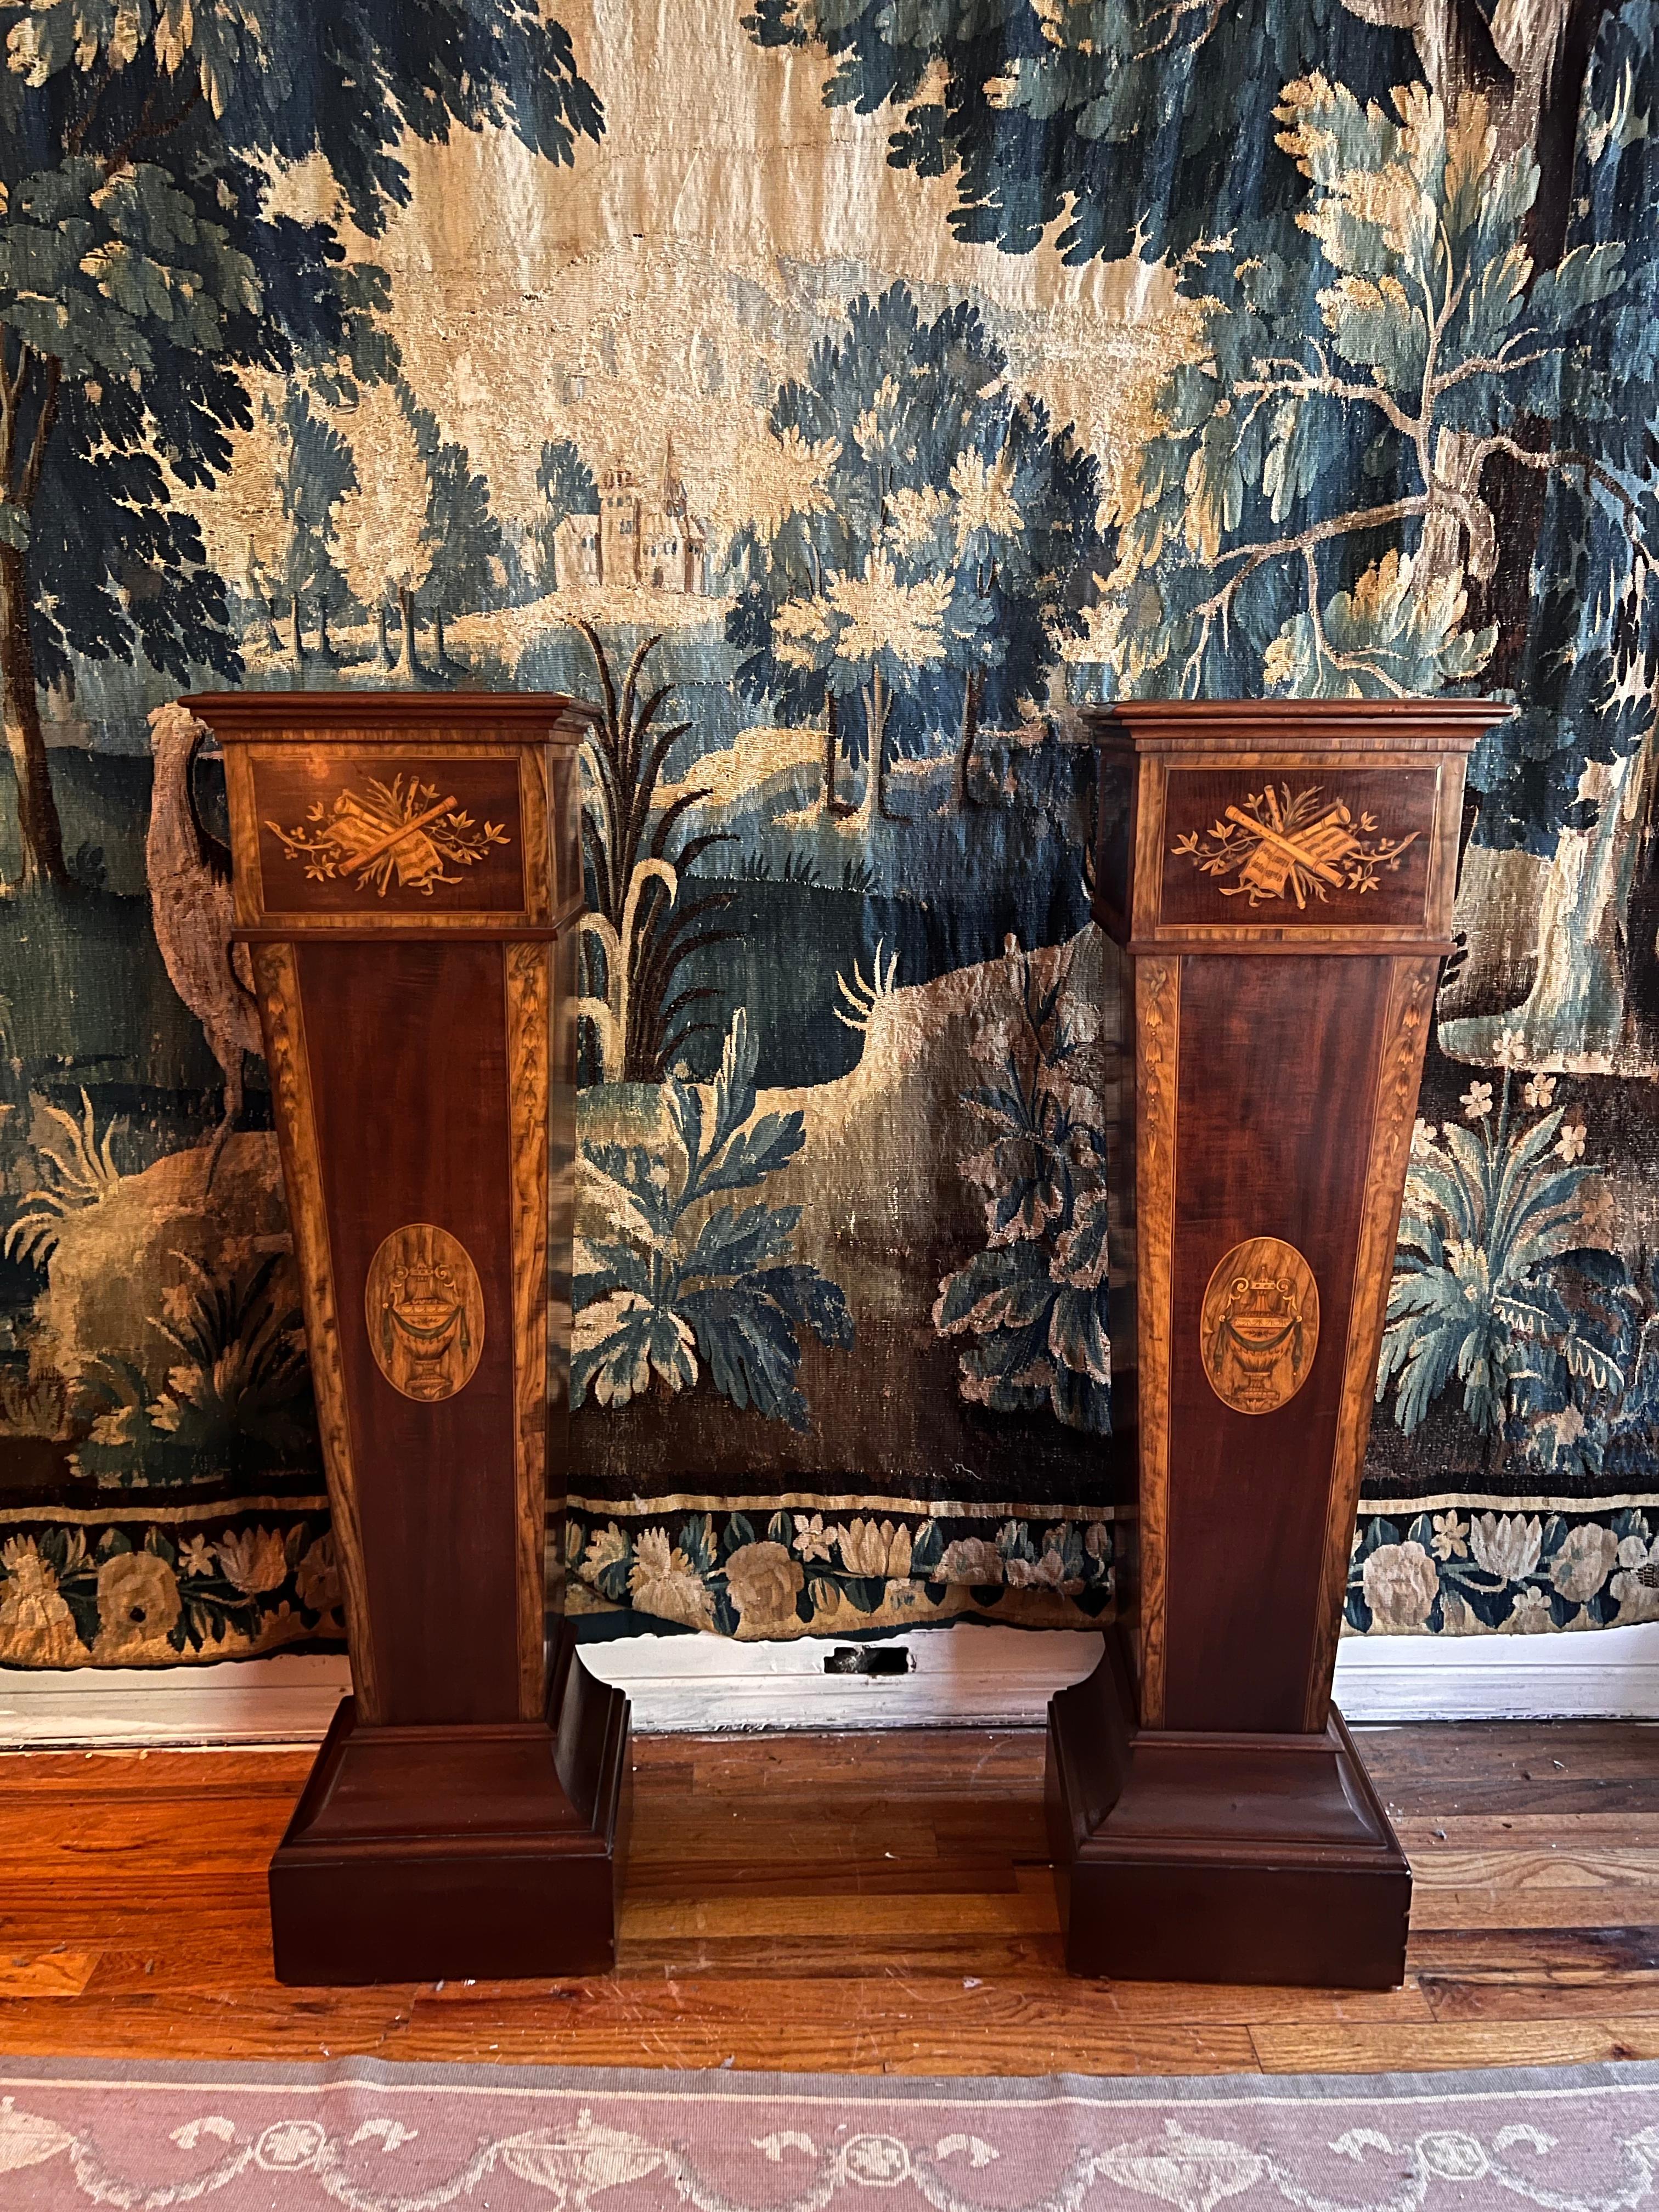 A pair of handsome neoclassical pedestals in mahogany and inlaid detailing. The upper portion is decorated with musical instruments and foliage with the shaft bearing a oval inlay of a classical urn. The edges of the shaft are decorated in with